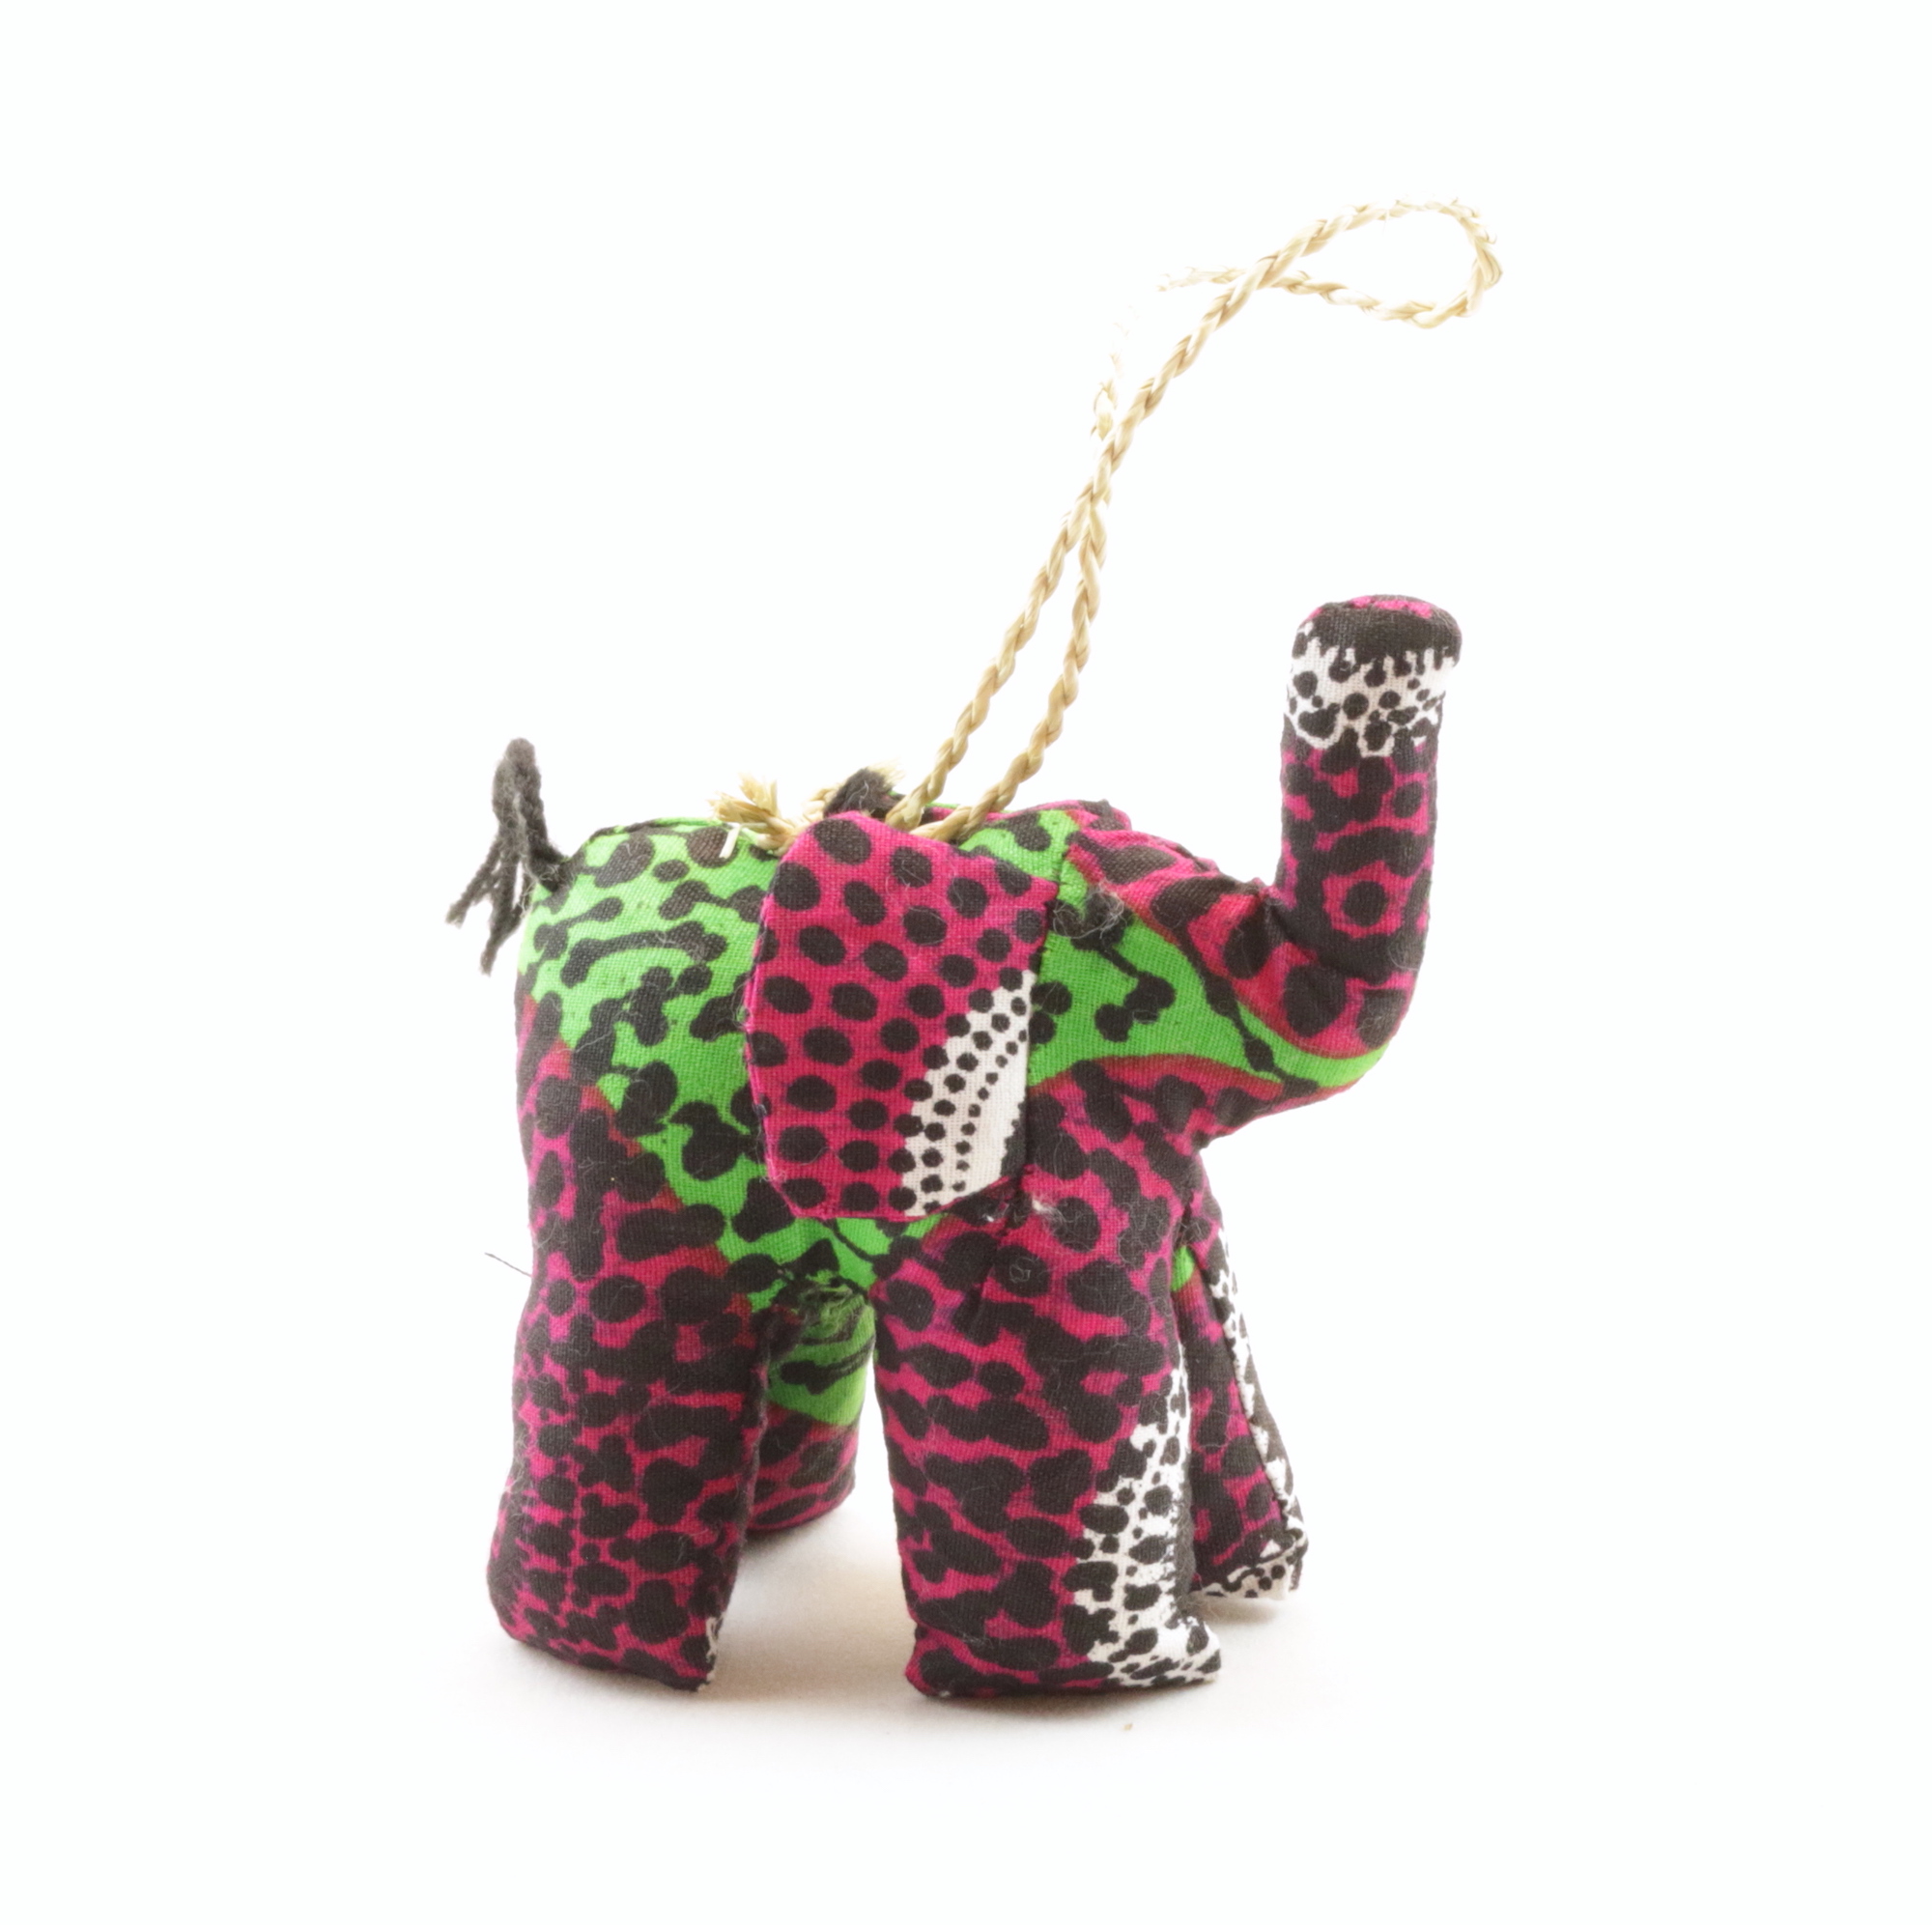 Stuffed Elephant Ornament (Pink and Green) - Ornaments4Orphans.org